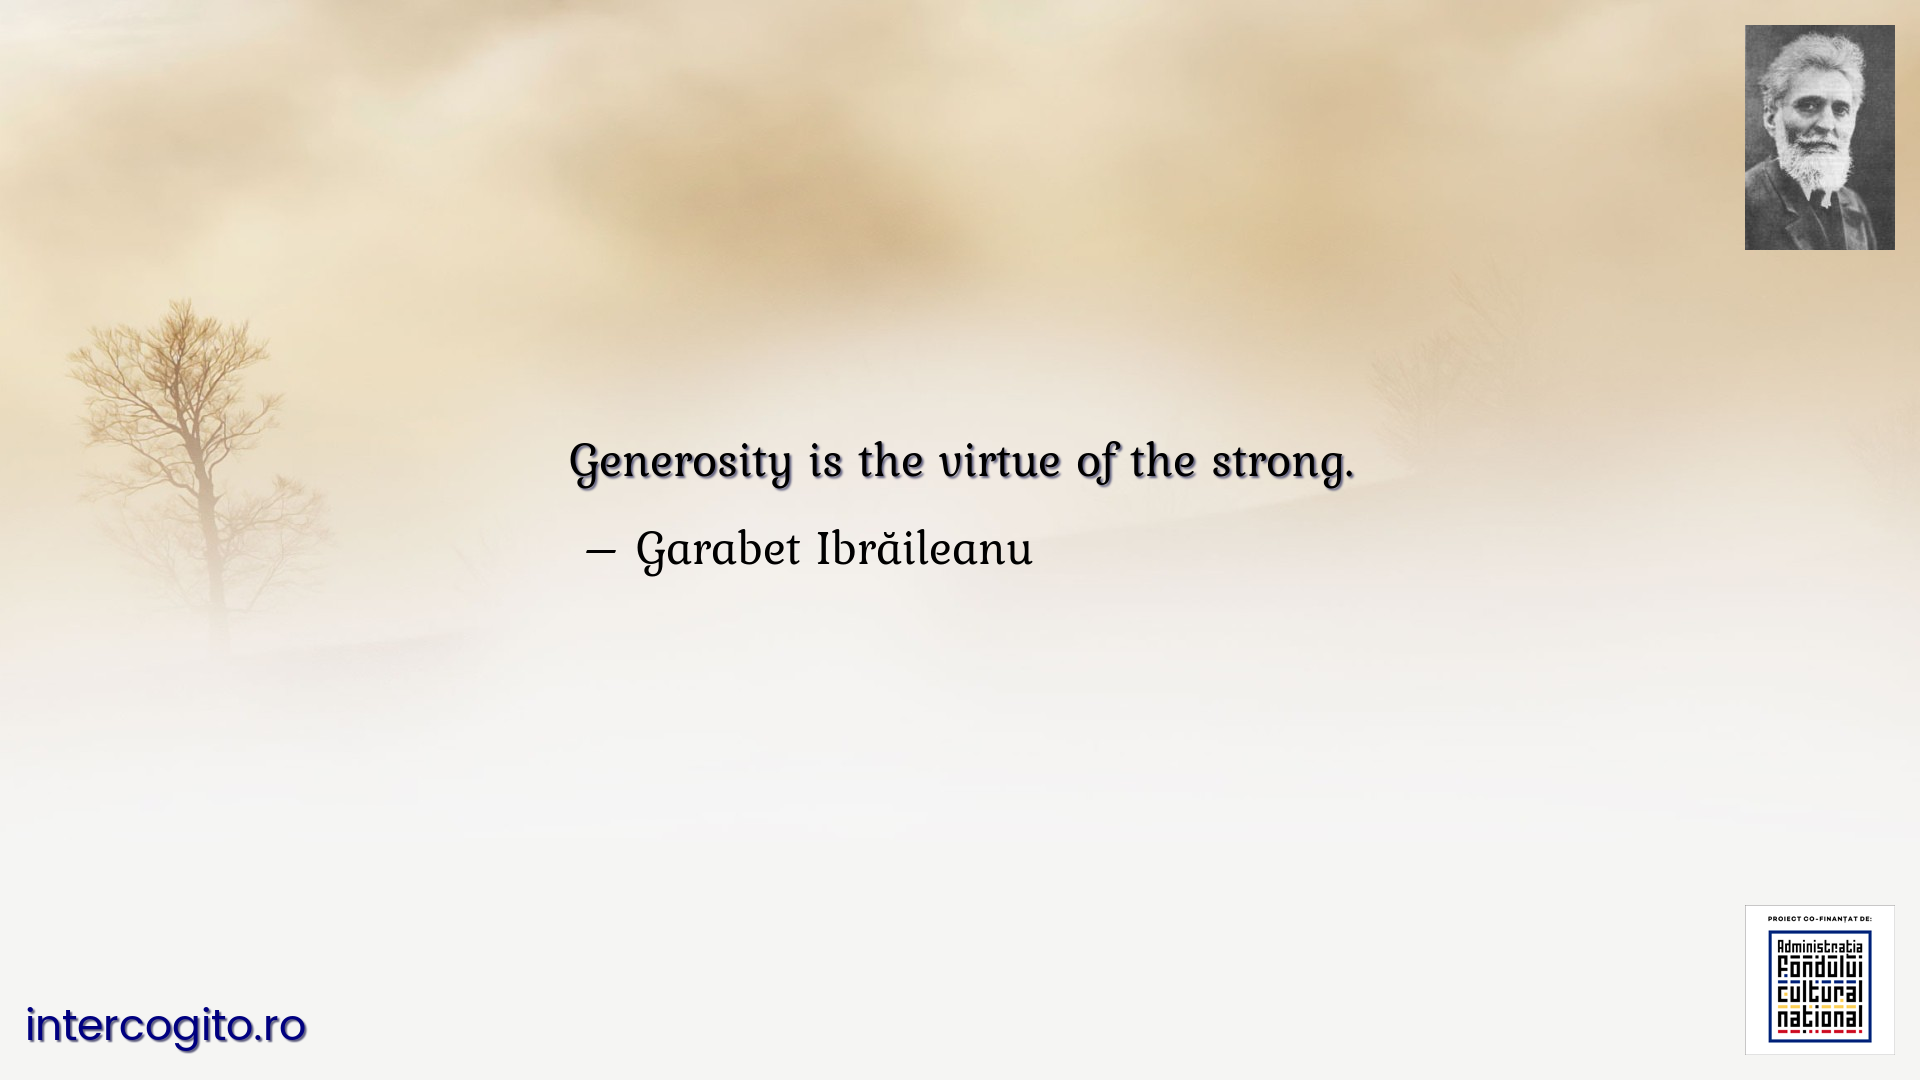 Generosity is the virtue of the strong.